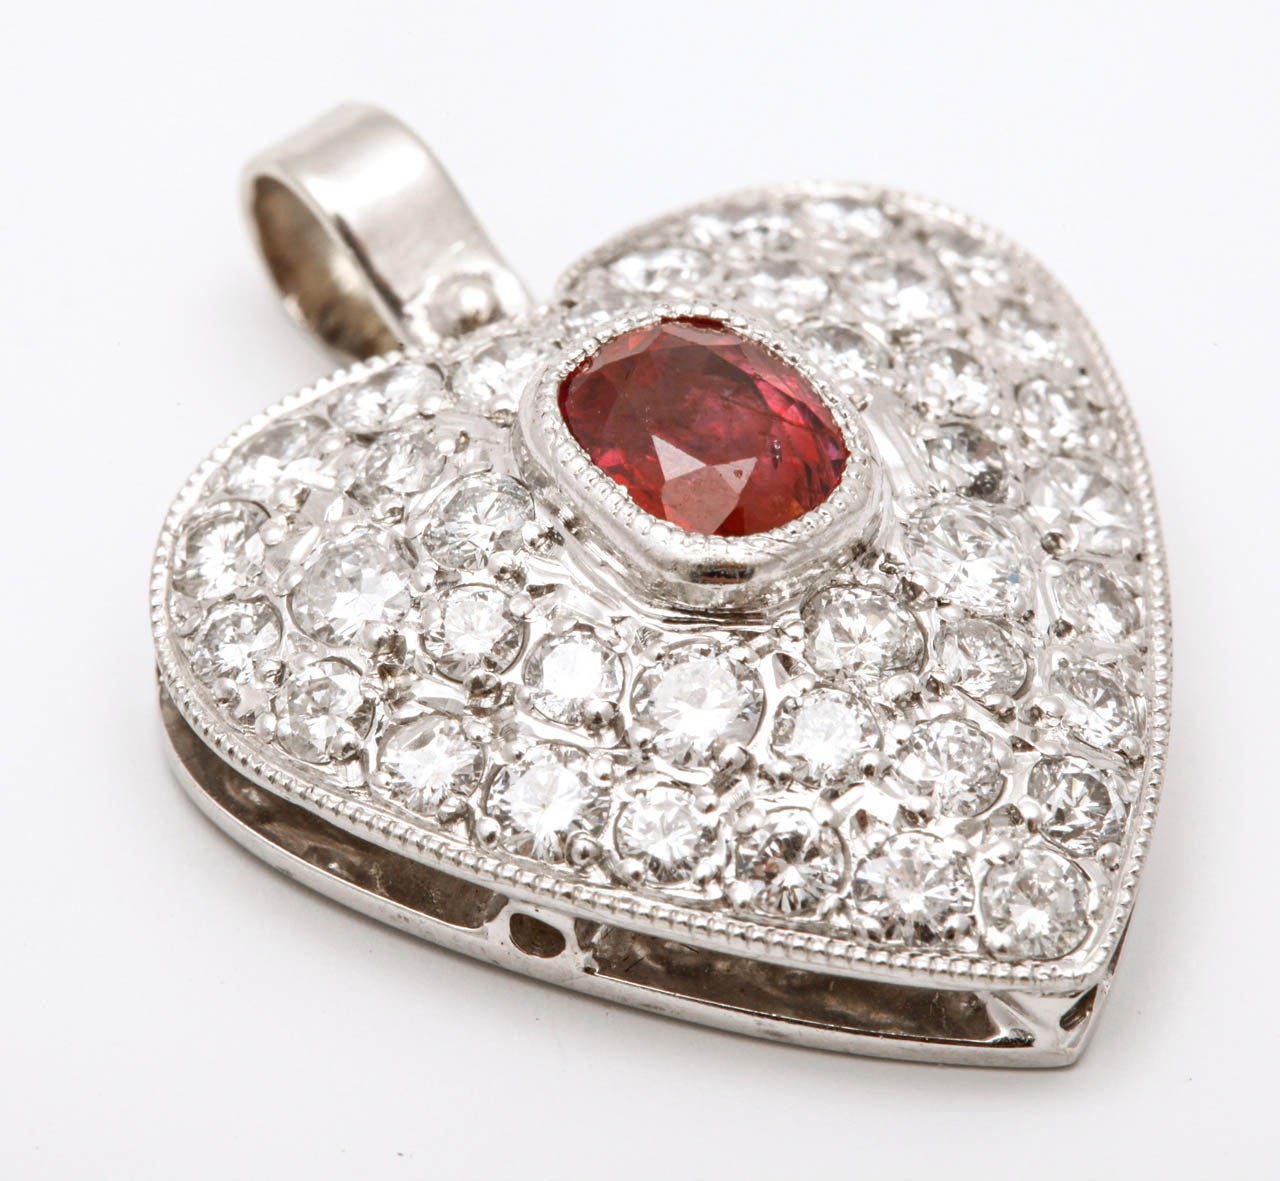 A 14 carat white gold ruby and diamond heart-shaped pendant
Designed as a heart set with an oval-cut ruby to a surround of pavé-set brilliant-cut diamonds with a total weight of approximately 2.90 carats.

All of our prices exclude VAT.